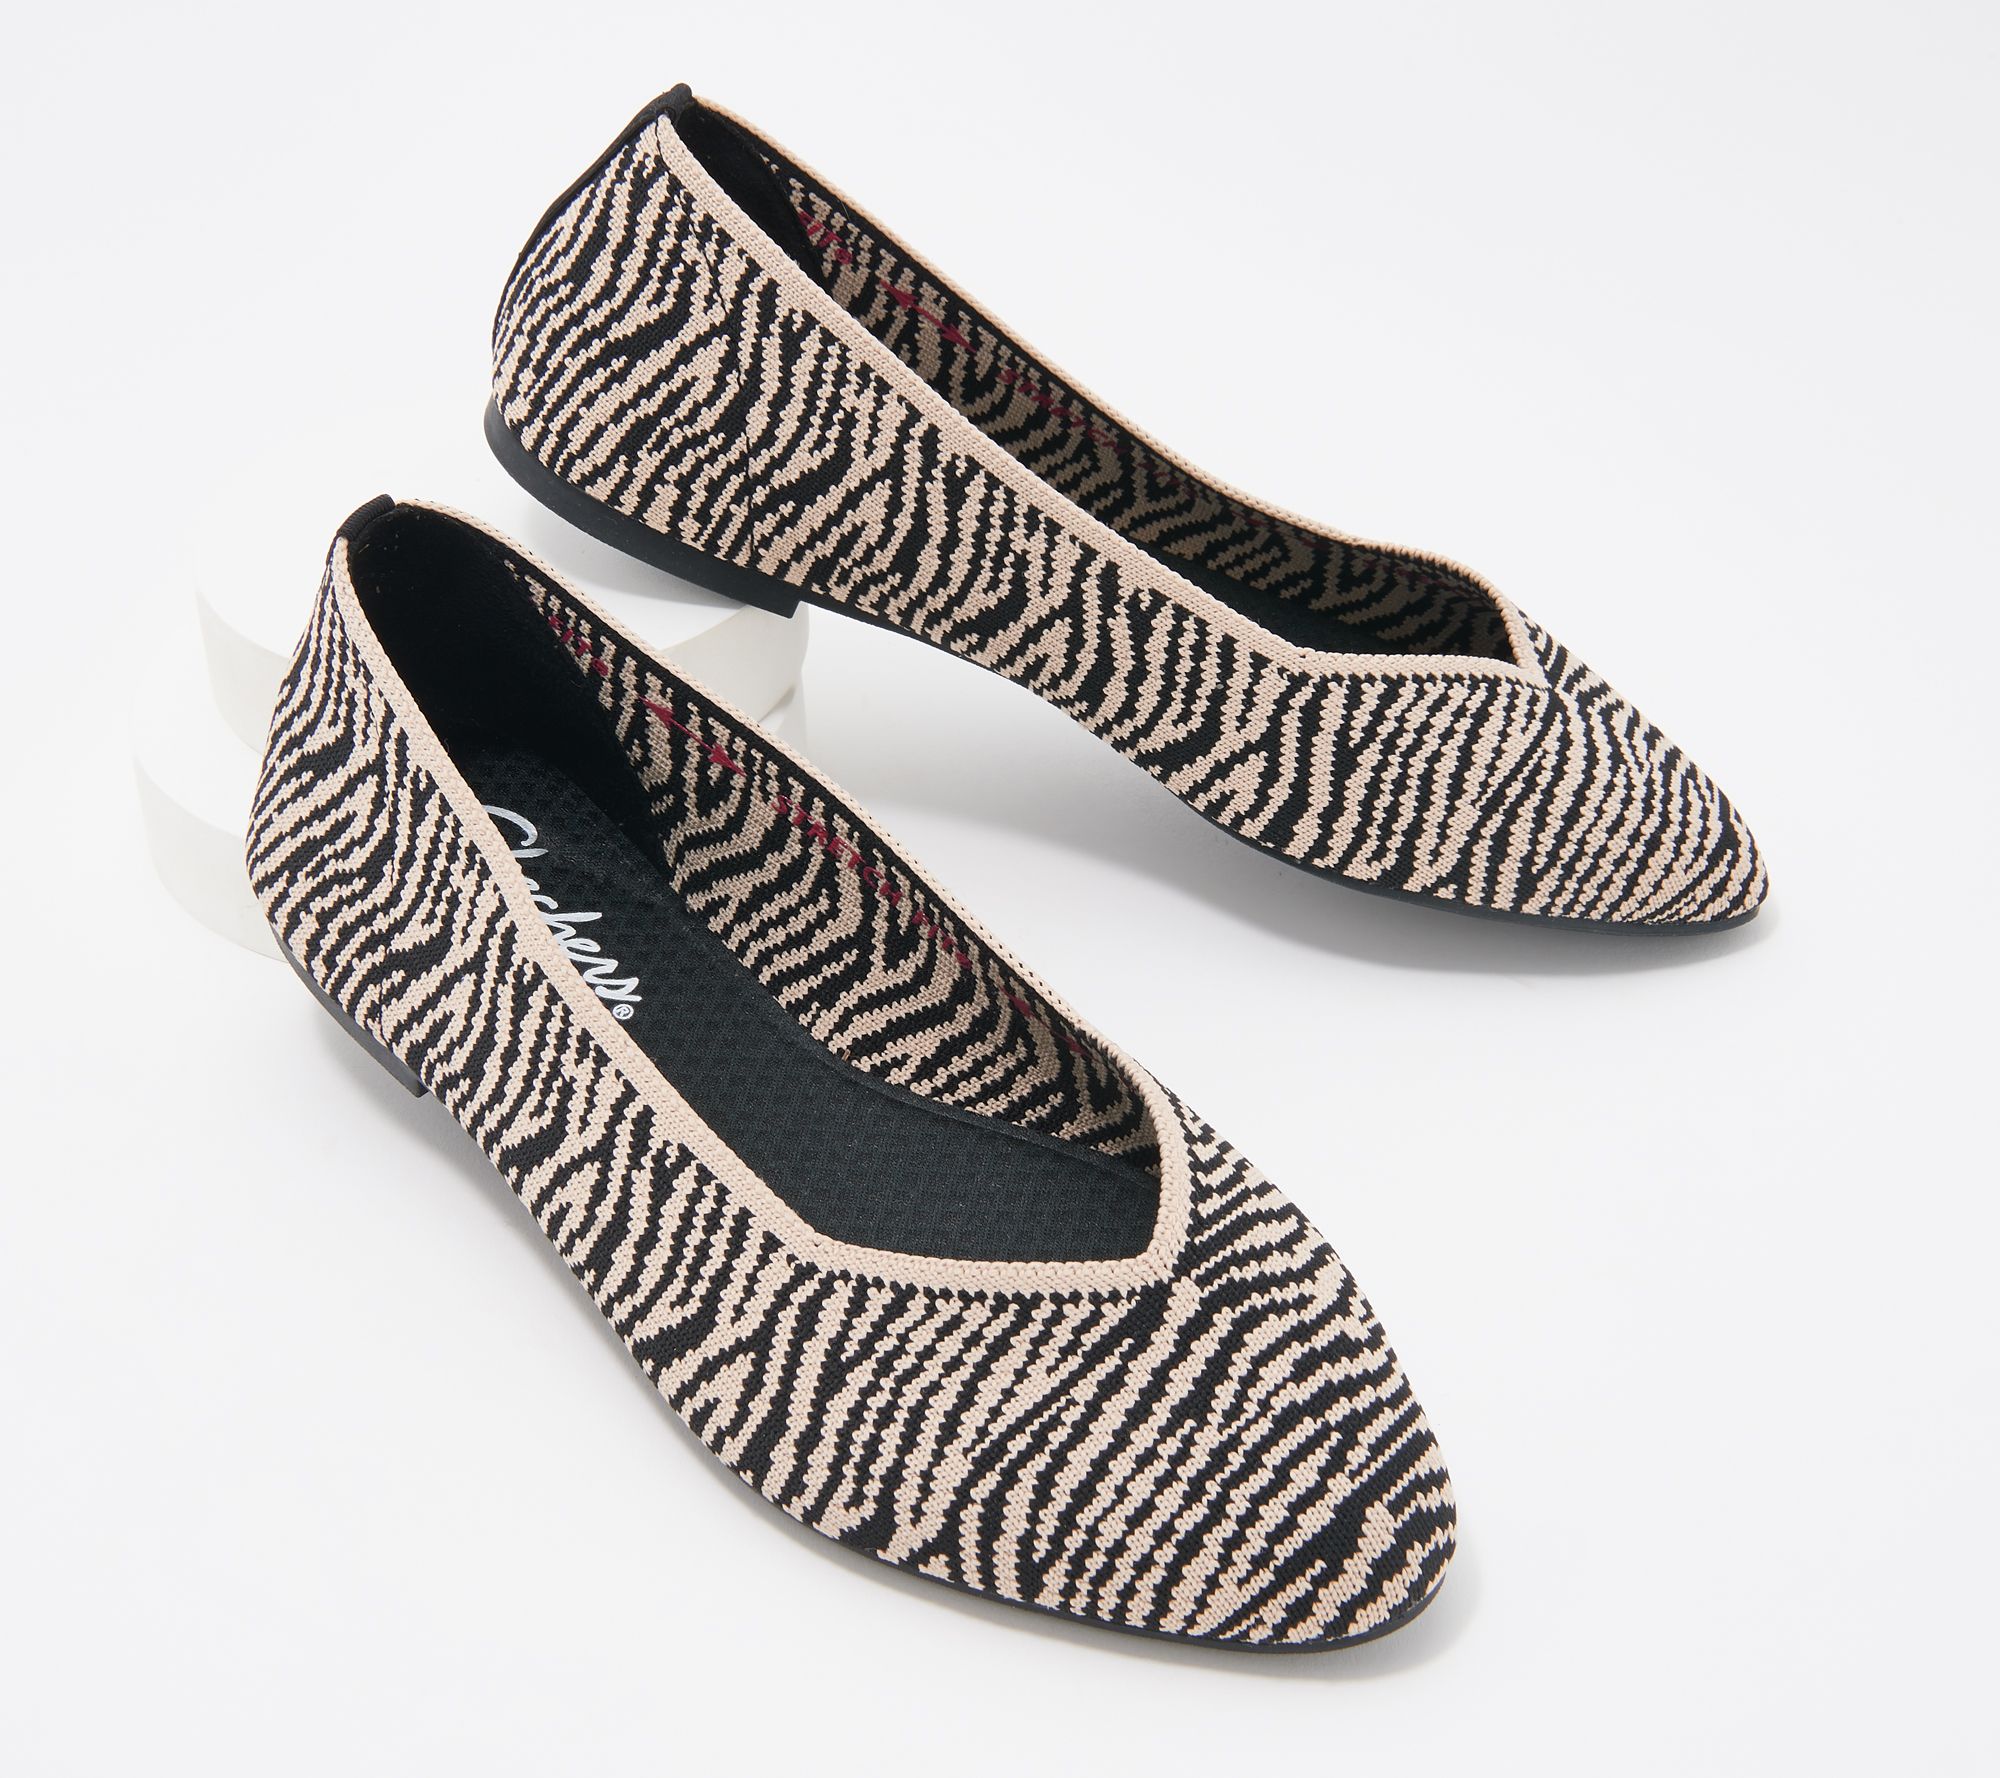 Skechers Animal Print Washable Knit Slip-Ons - Cleo Claw-Some - QVC.com